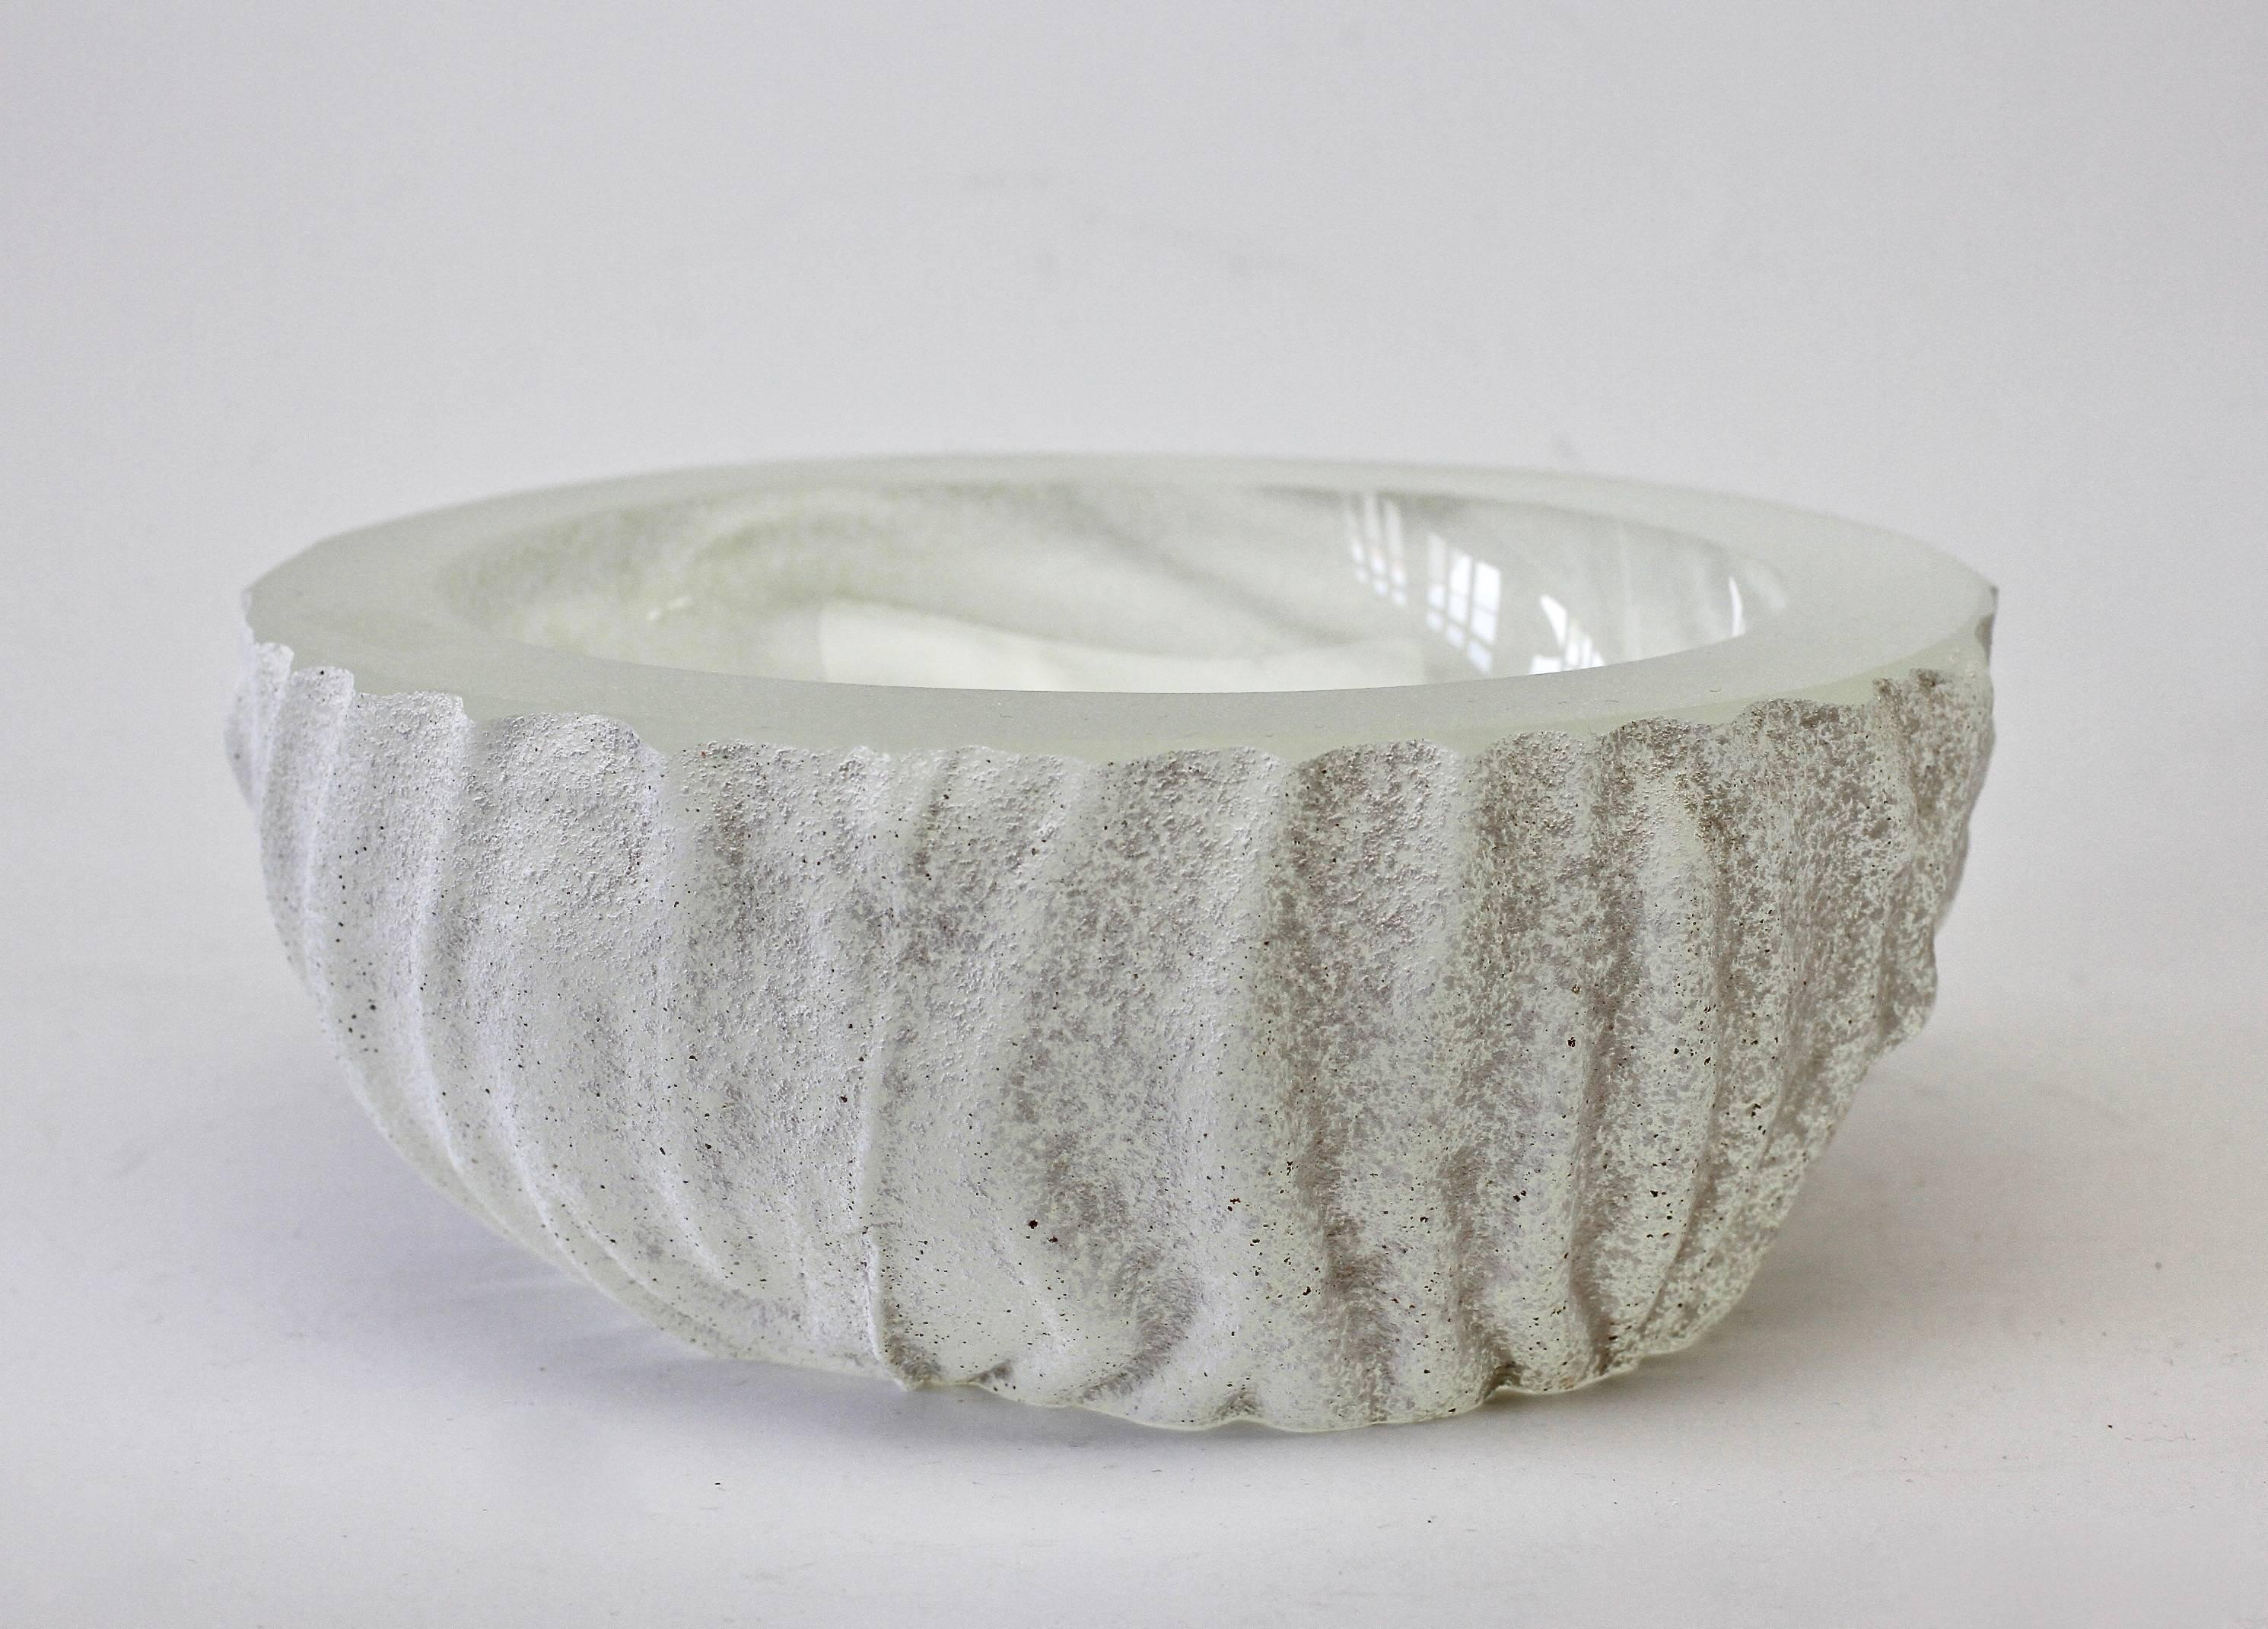 Large and heavy 'a Scavo' white colored / coloured glass bowl or dish attributed to Maurizio Albarelli for Seguso Vetri d'Arte Murano, Italy, circa 1980s. Elegant in form and showing extraordinary craftmanship with the use of the 'Scavo' technique